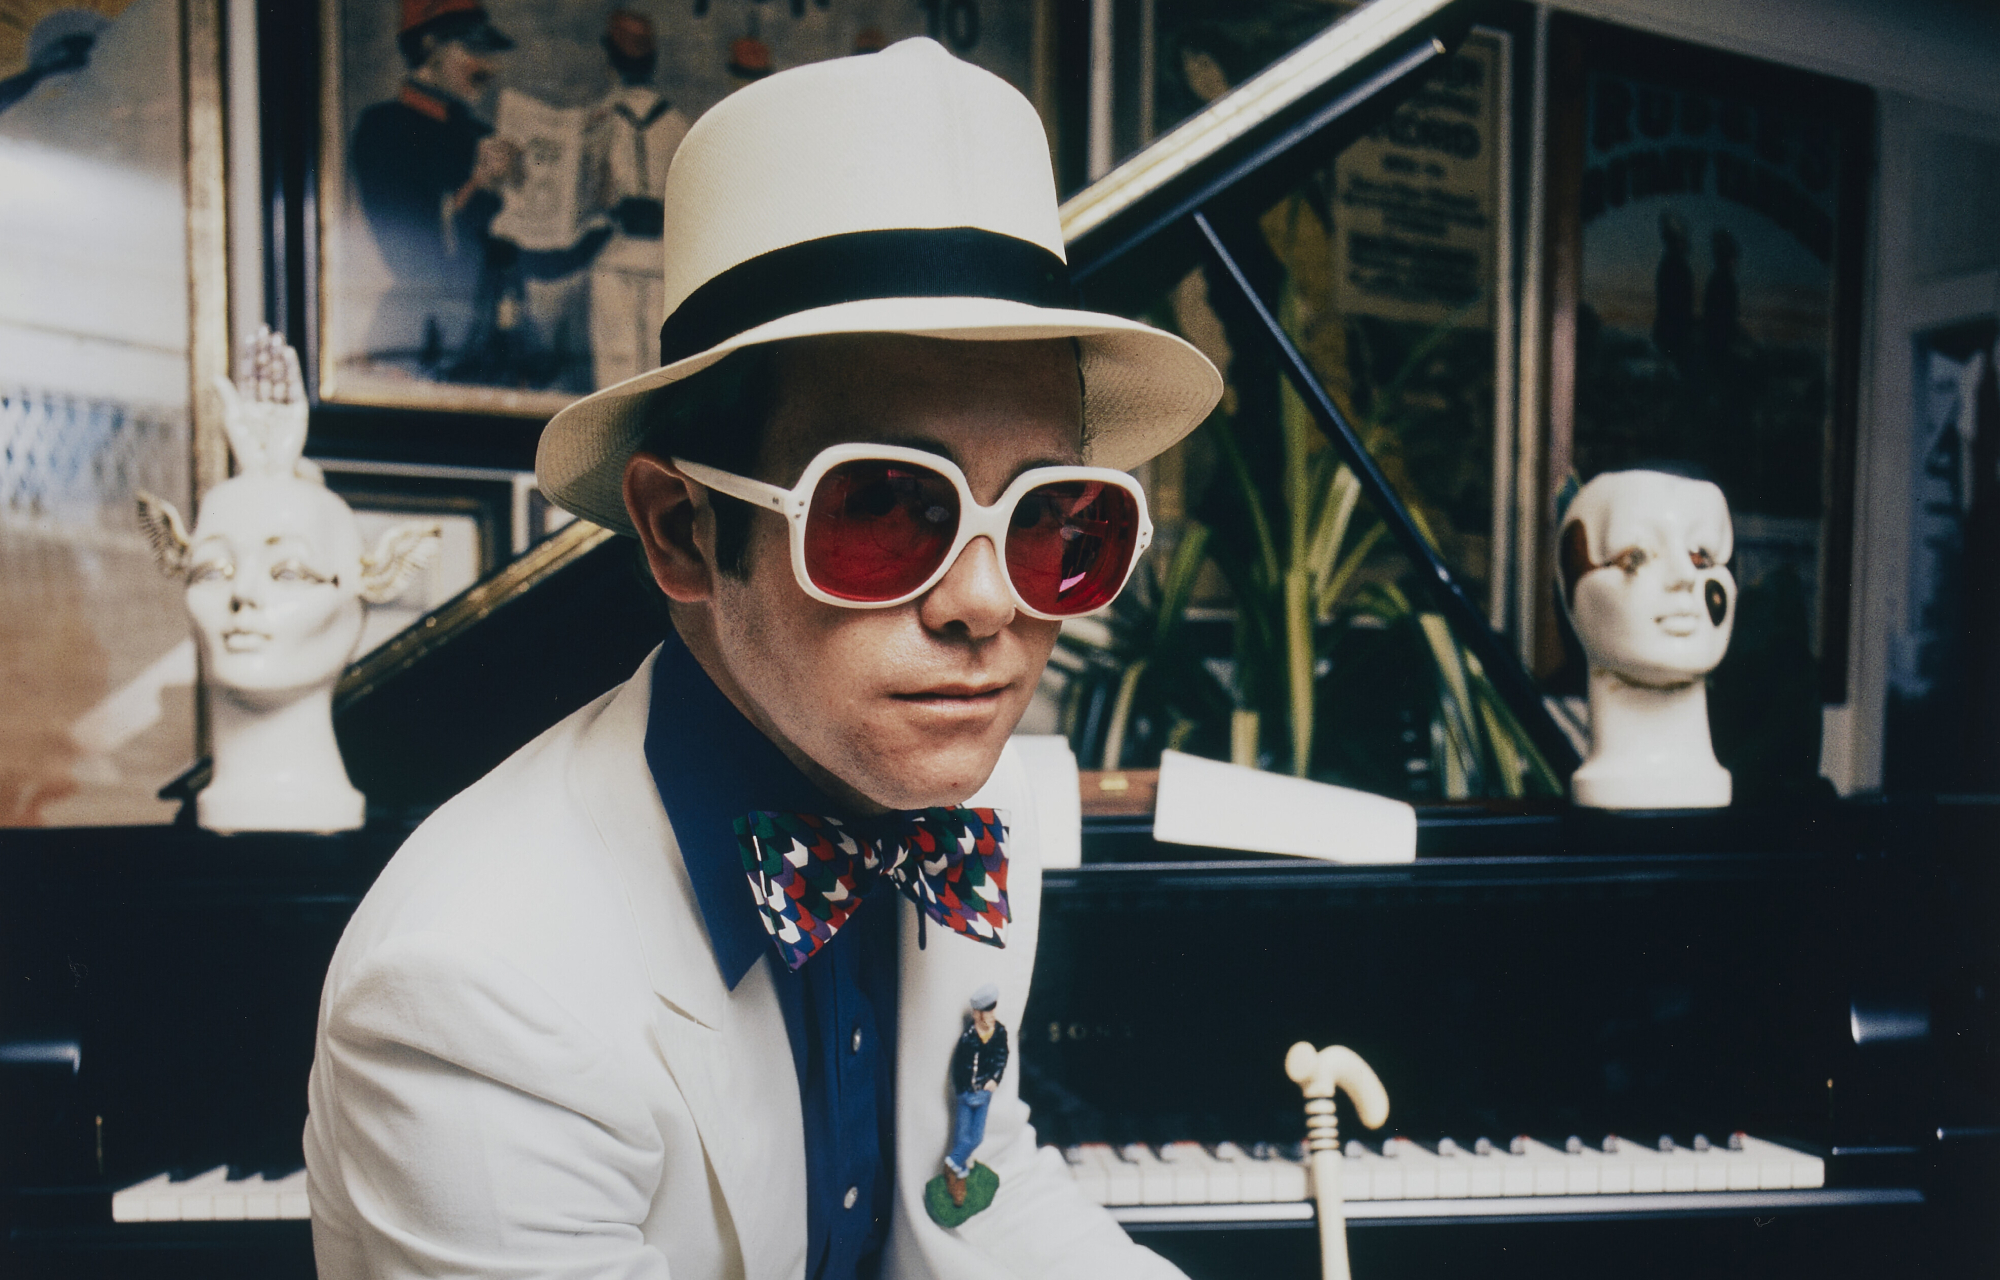 THE COLLECTION OF SIR ELTON JOHN: GOODBYE PEACHTREE ROAD